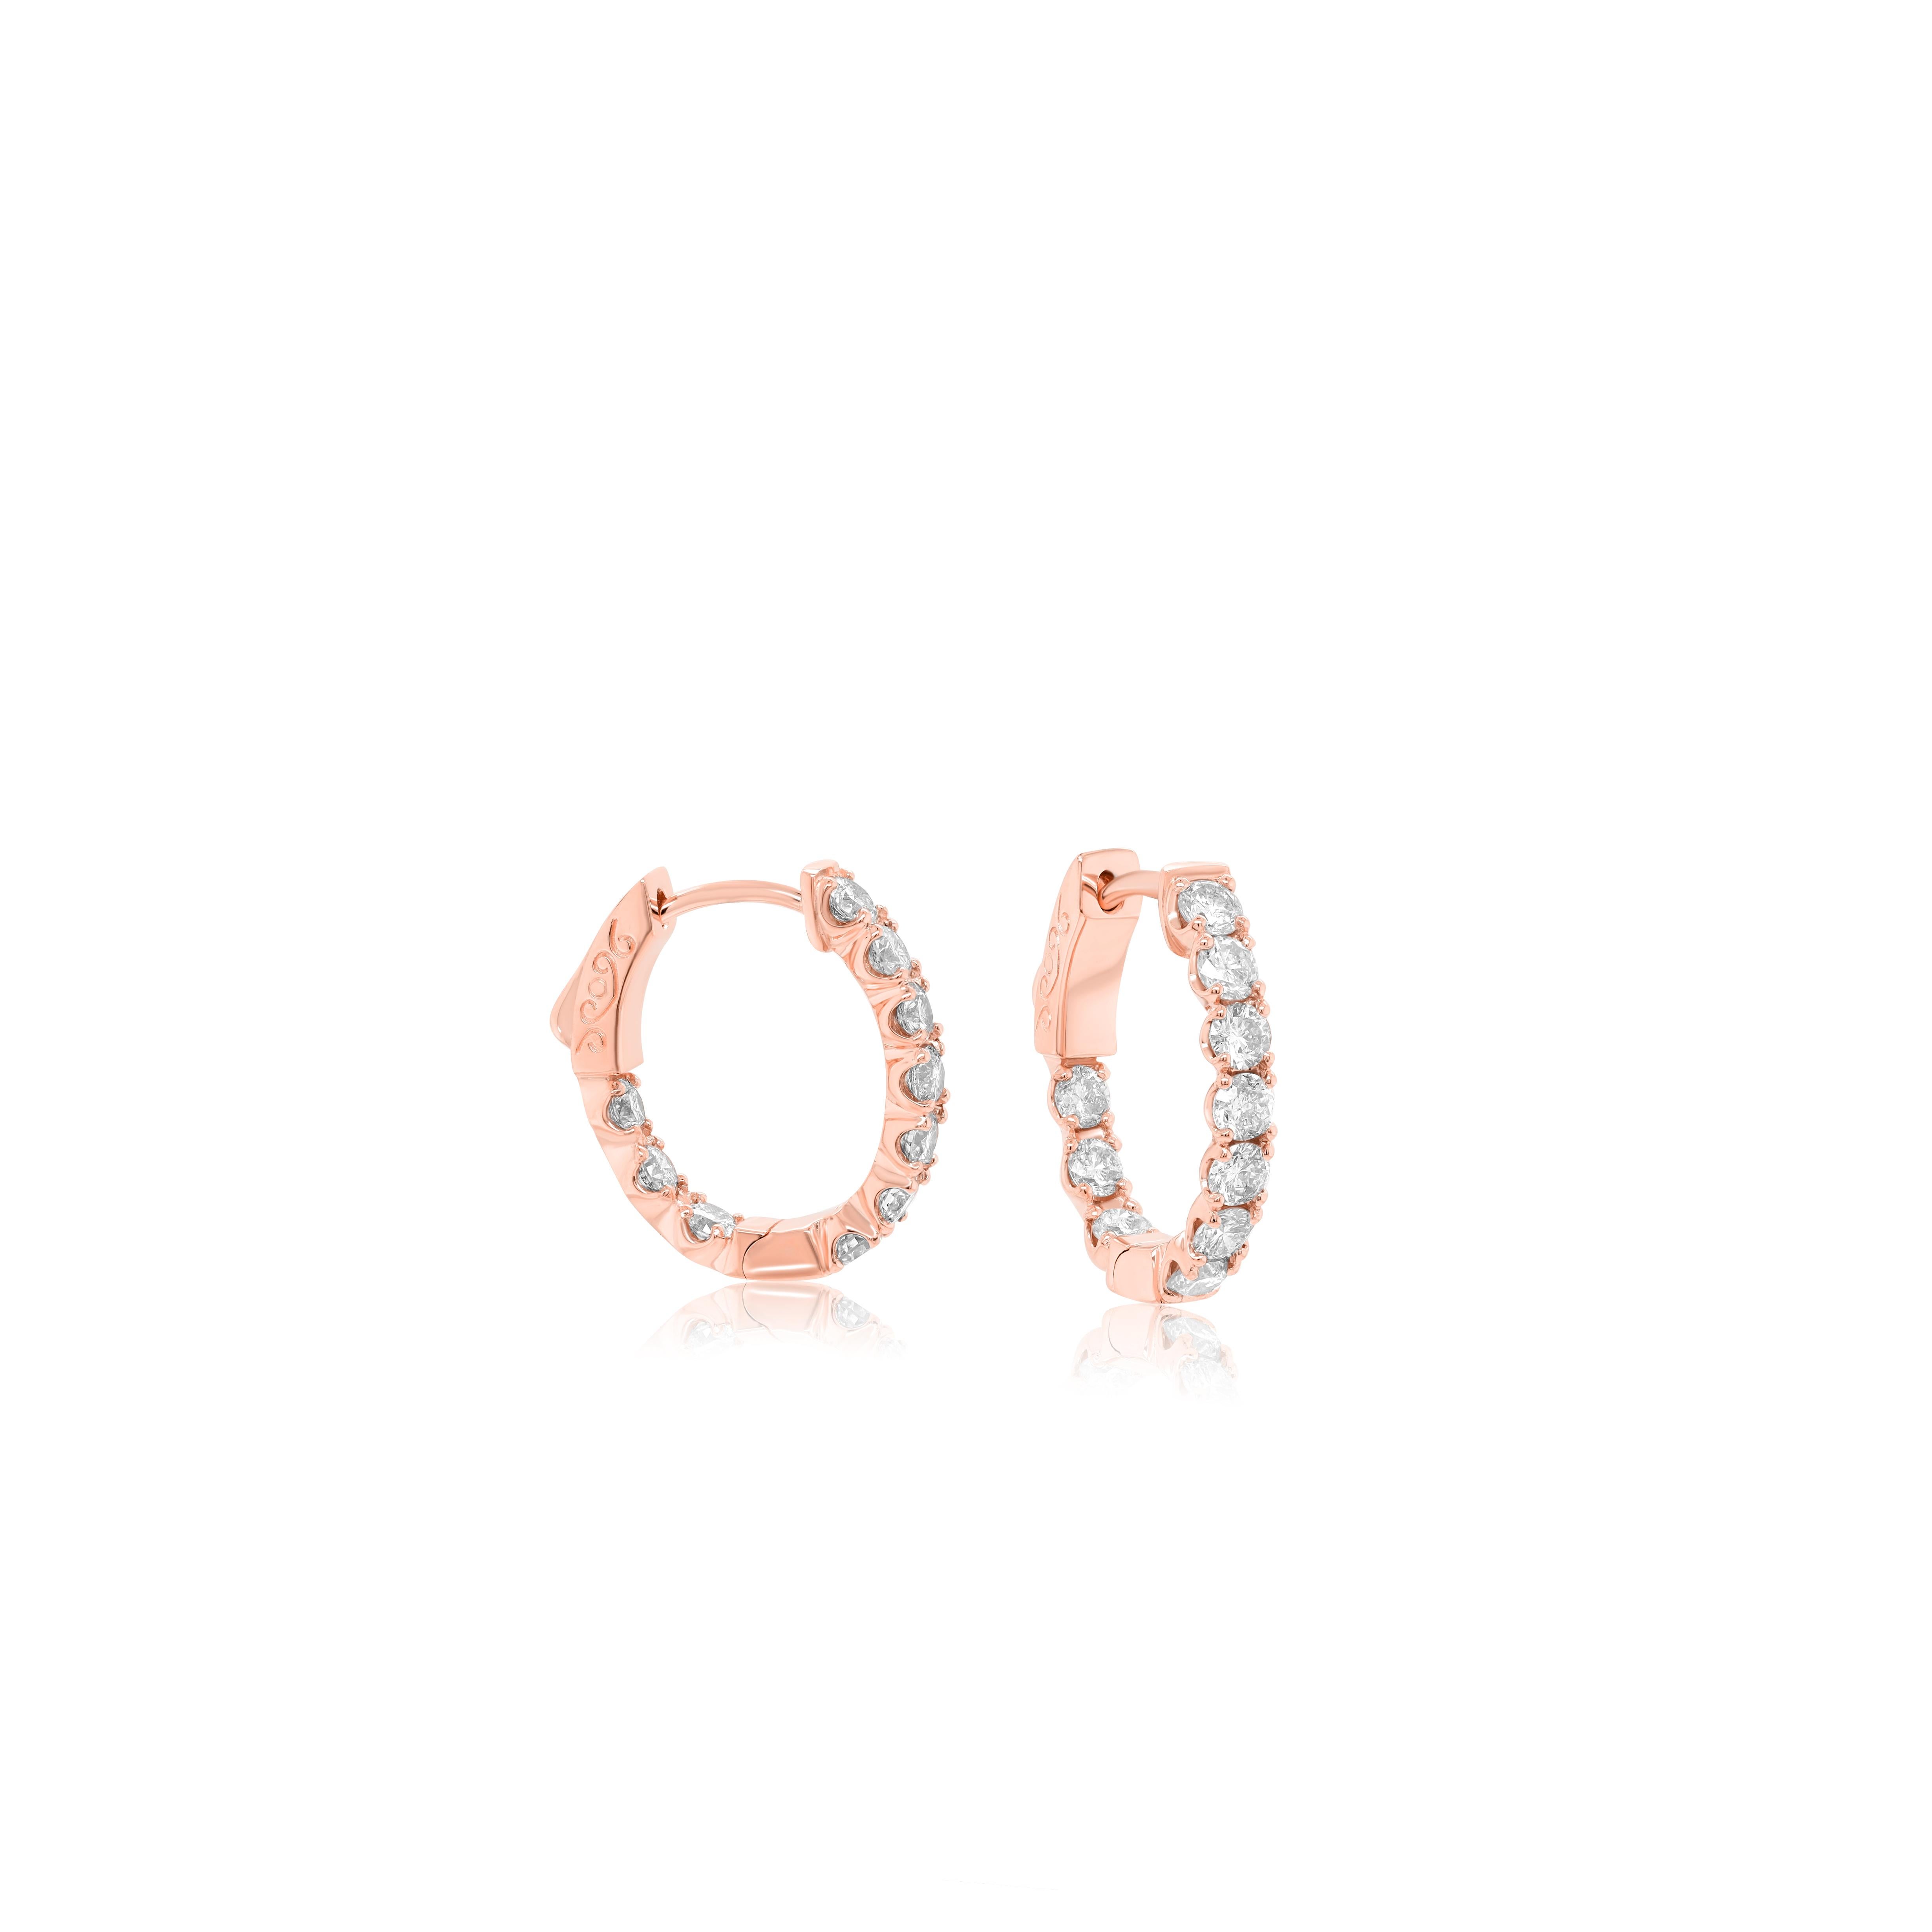 14KT Rose Gold Diamond Oval Hoops 1.65cts of Diamonds  20 STONES
Diana M. is a leading supplier of top-quality fine jewelry for over 35 years.
Diana M is one-stop shop for all your jewelry shopping, carrying line of diamond rings, earrings,